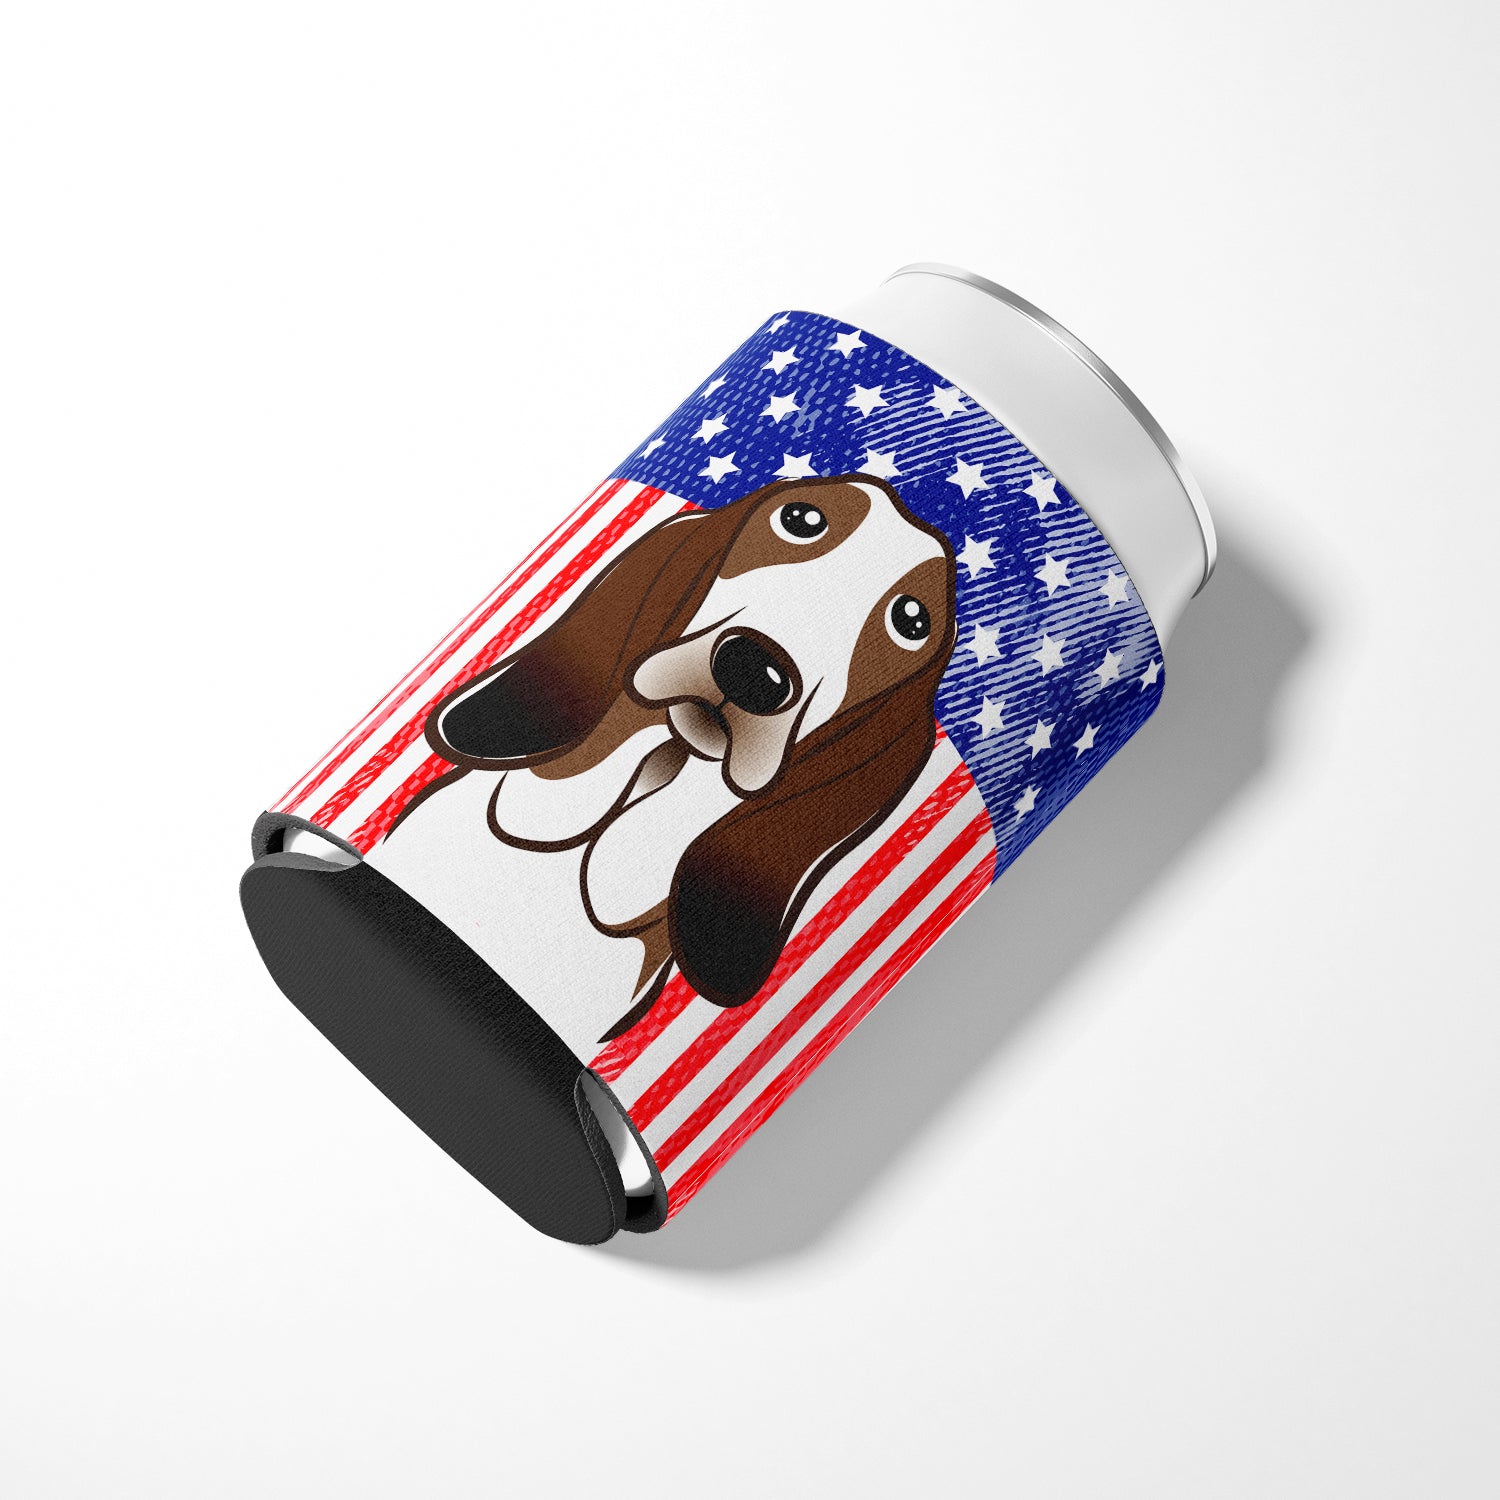 American Flag and Basset Hound Can or Bottle Hugger BB2173CC.